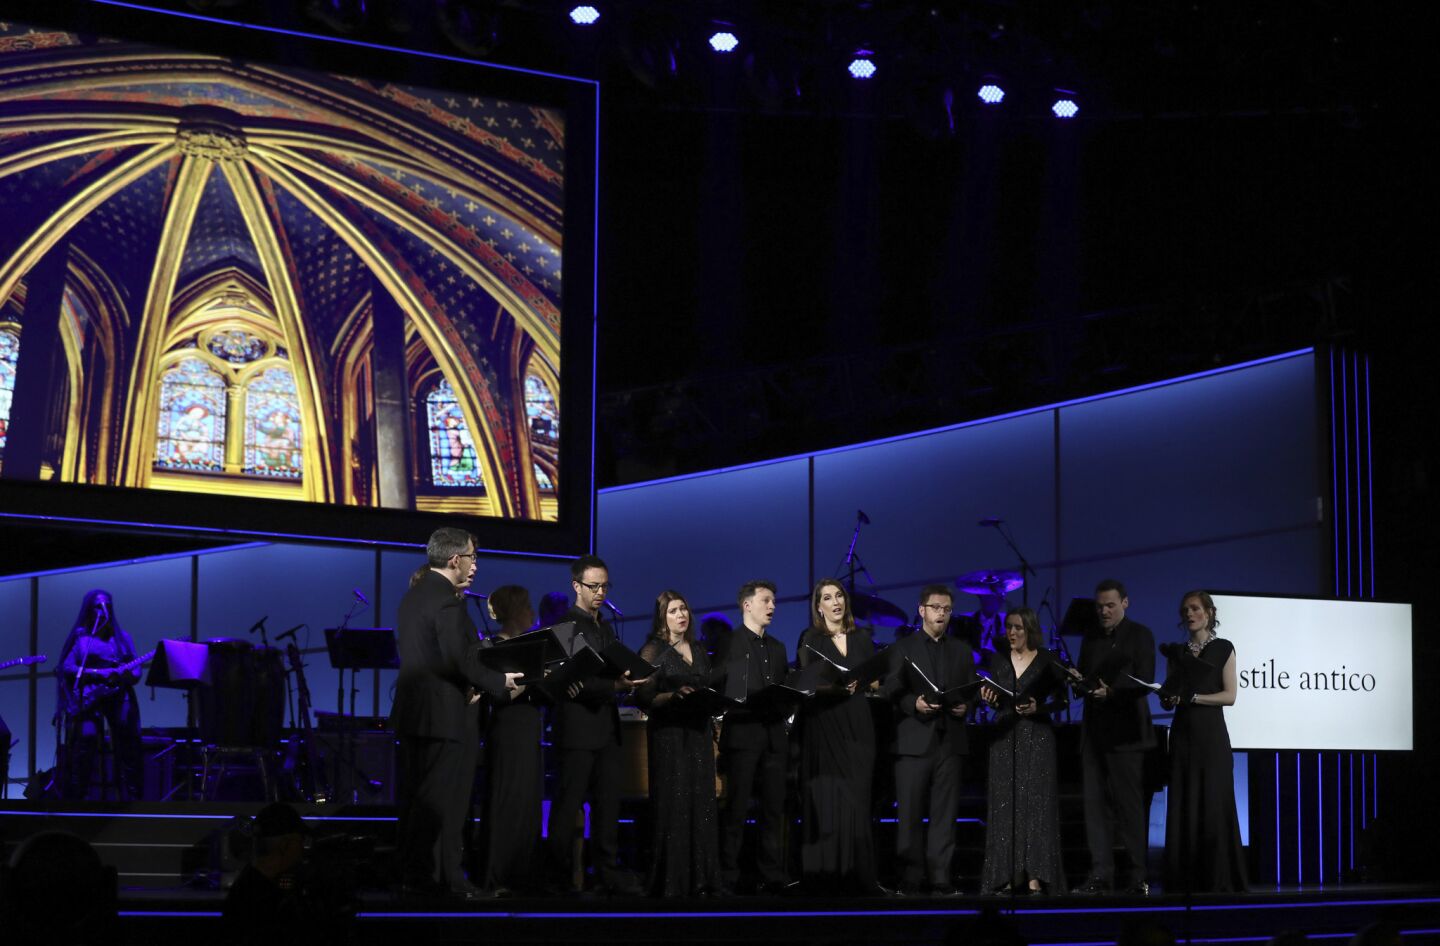 Stile Antico performs at the 60th Grammy Awards pre-telecast show.